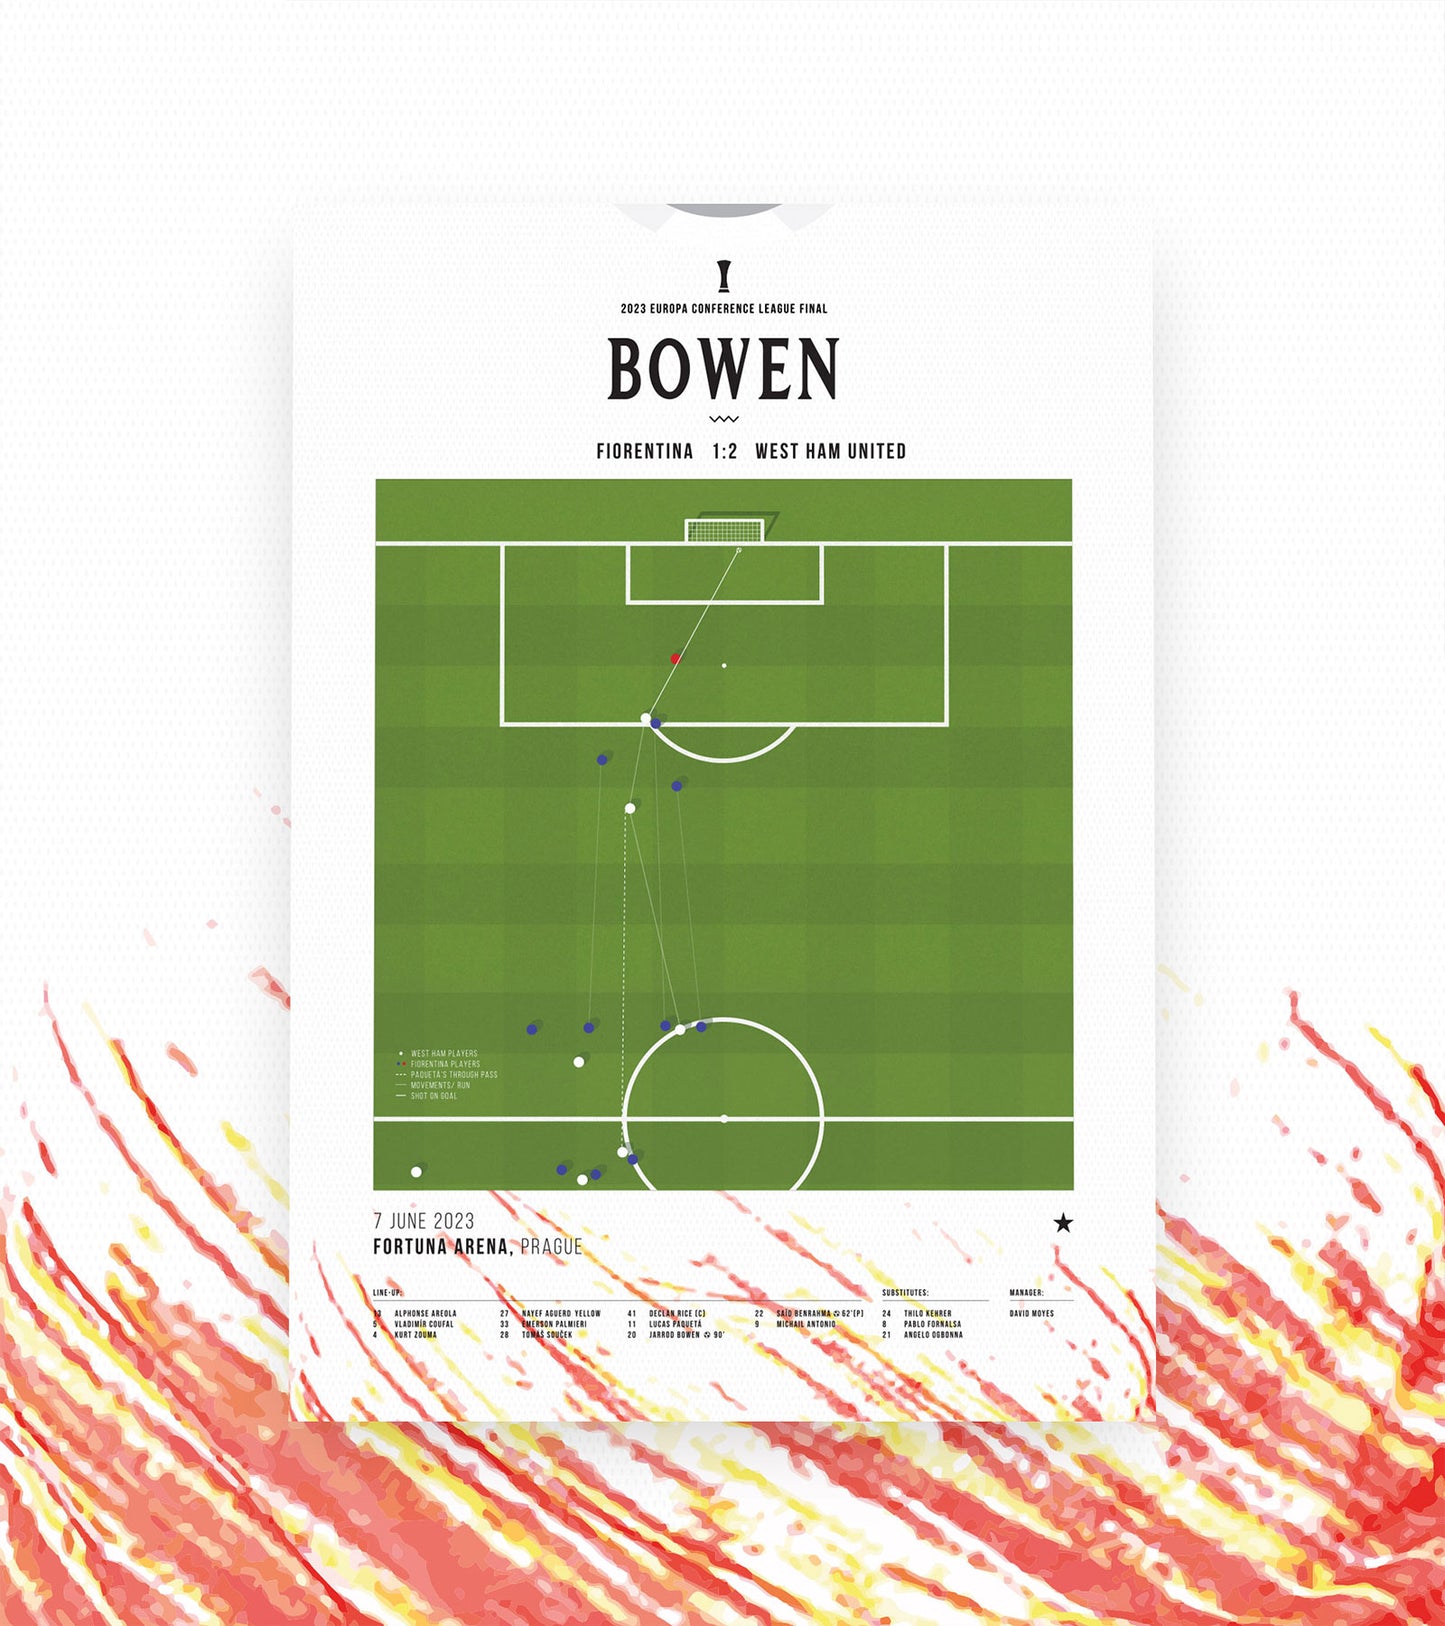 Bowen's Unforgettable Goal in the Conference League final